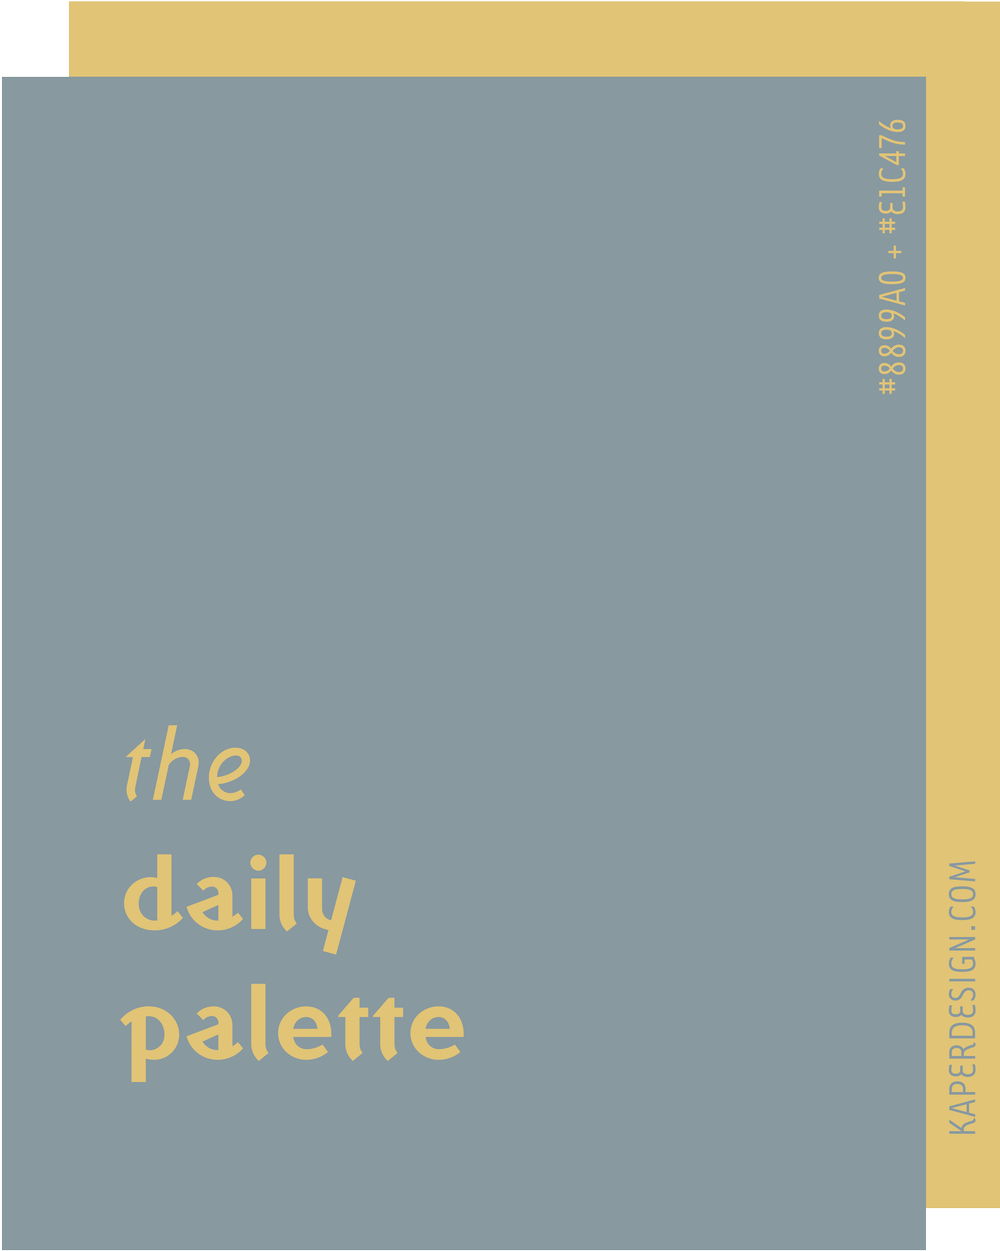 Kaper Design_the Daily Palette Project-05.png